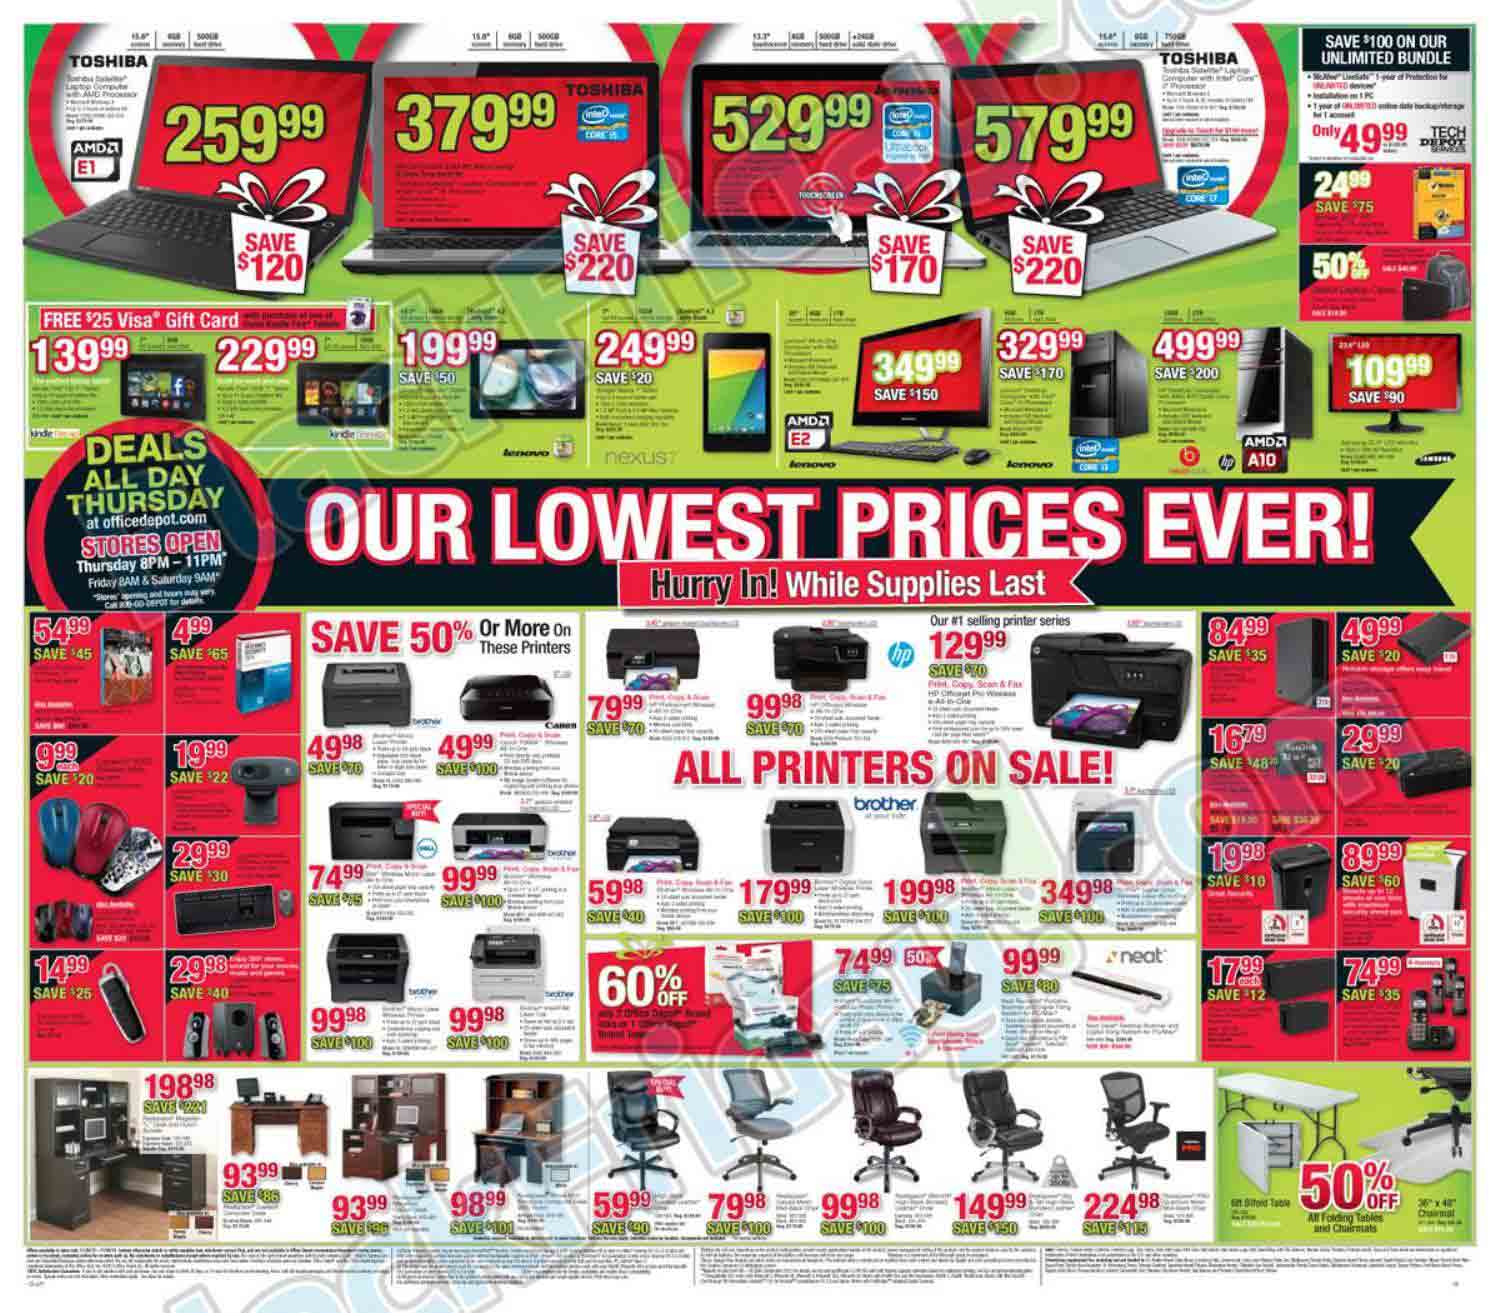 Office Depot Black Friday 2013 Ad - Find the Best Office ...